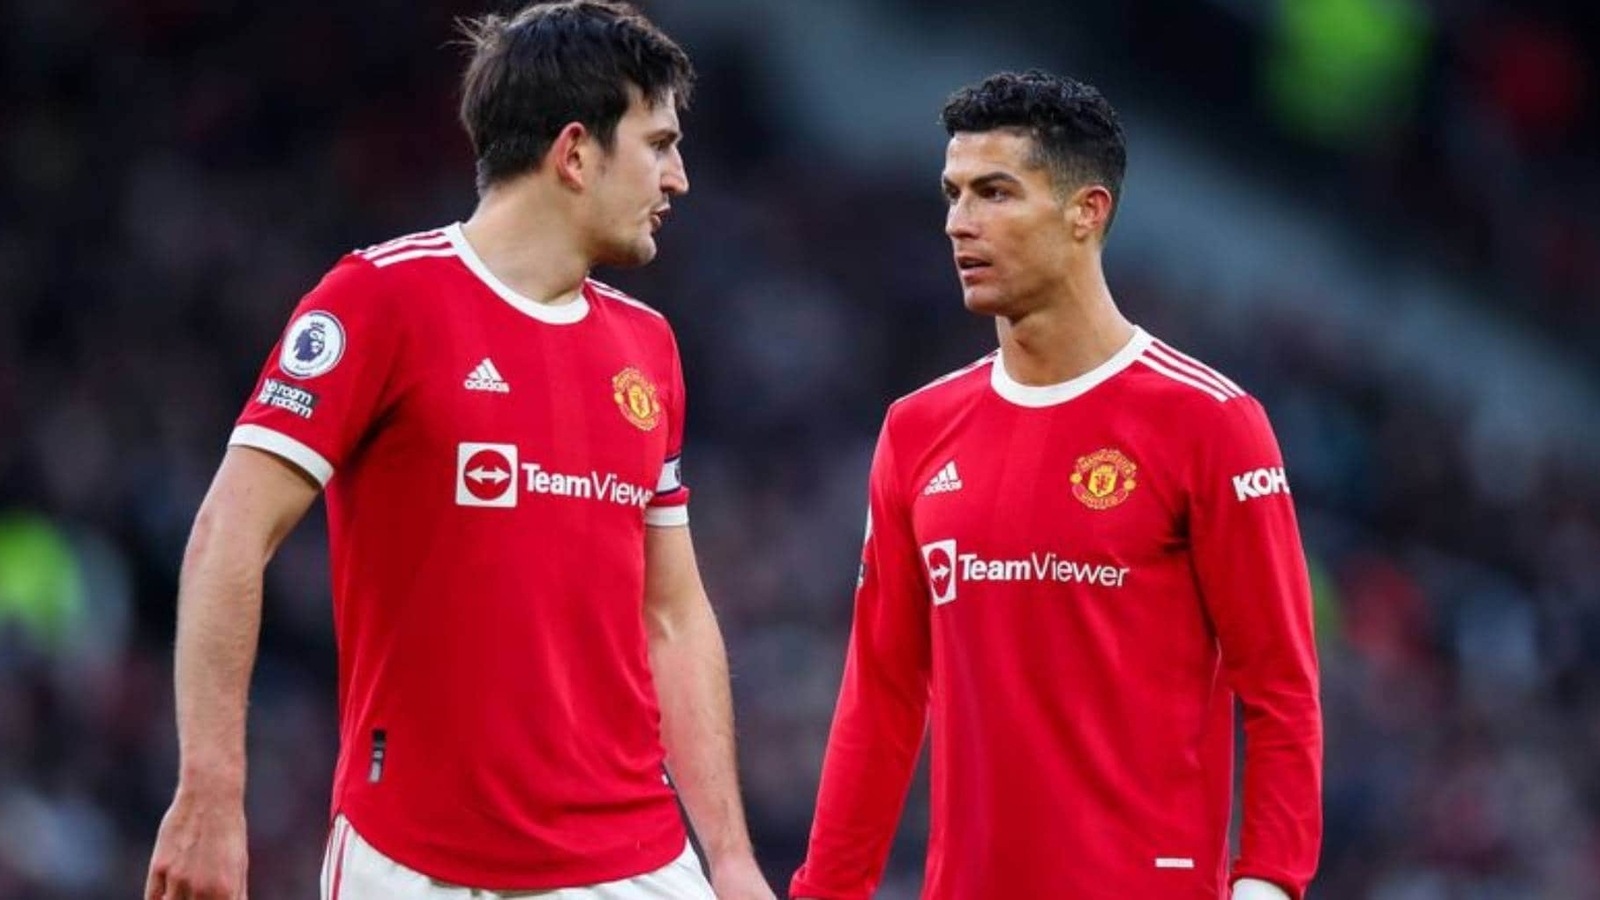 Amid Ronaldo transfer saga, Maguire likes Instagram post about Cristiano being upset over pay cut at Manchester United